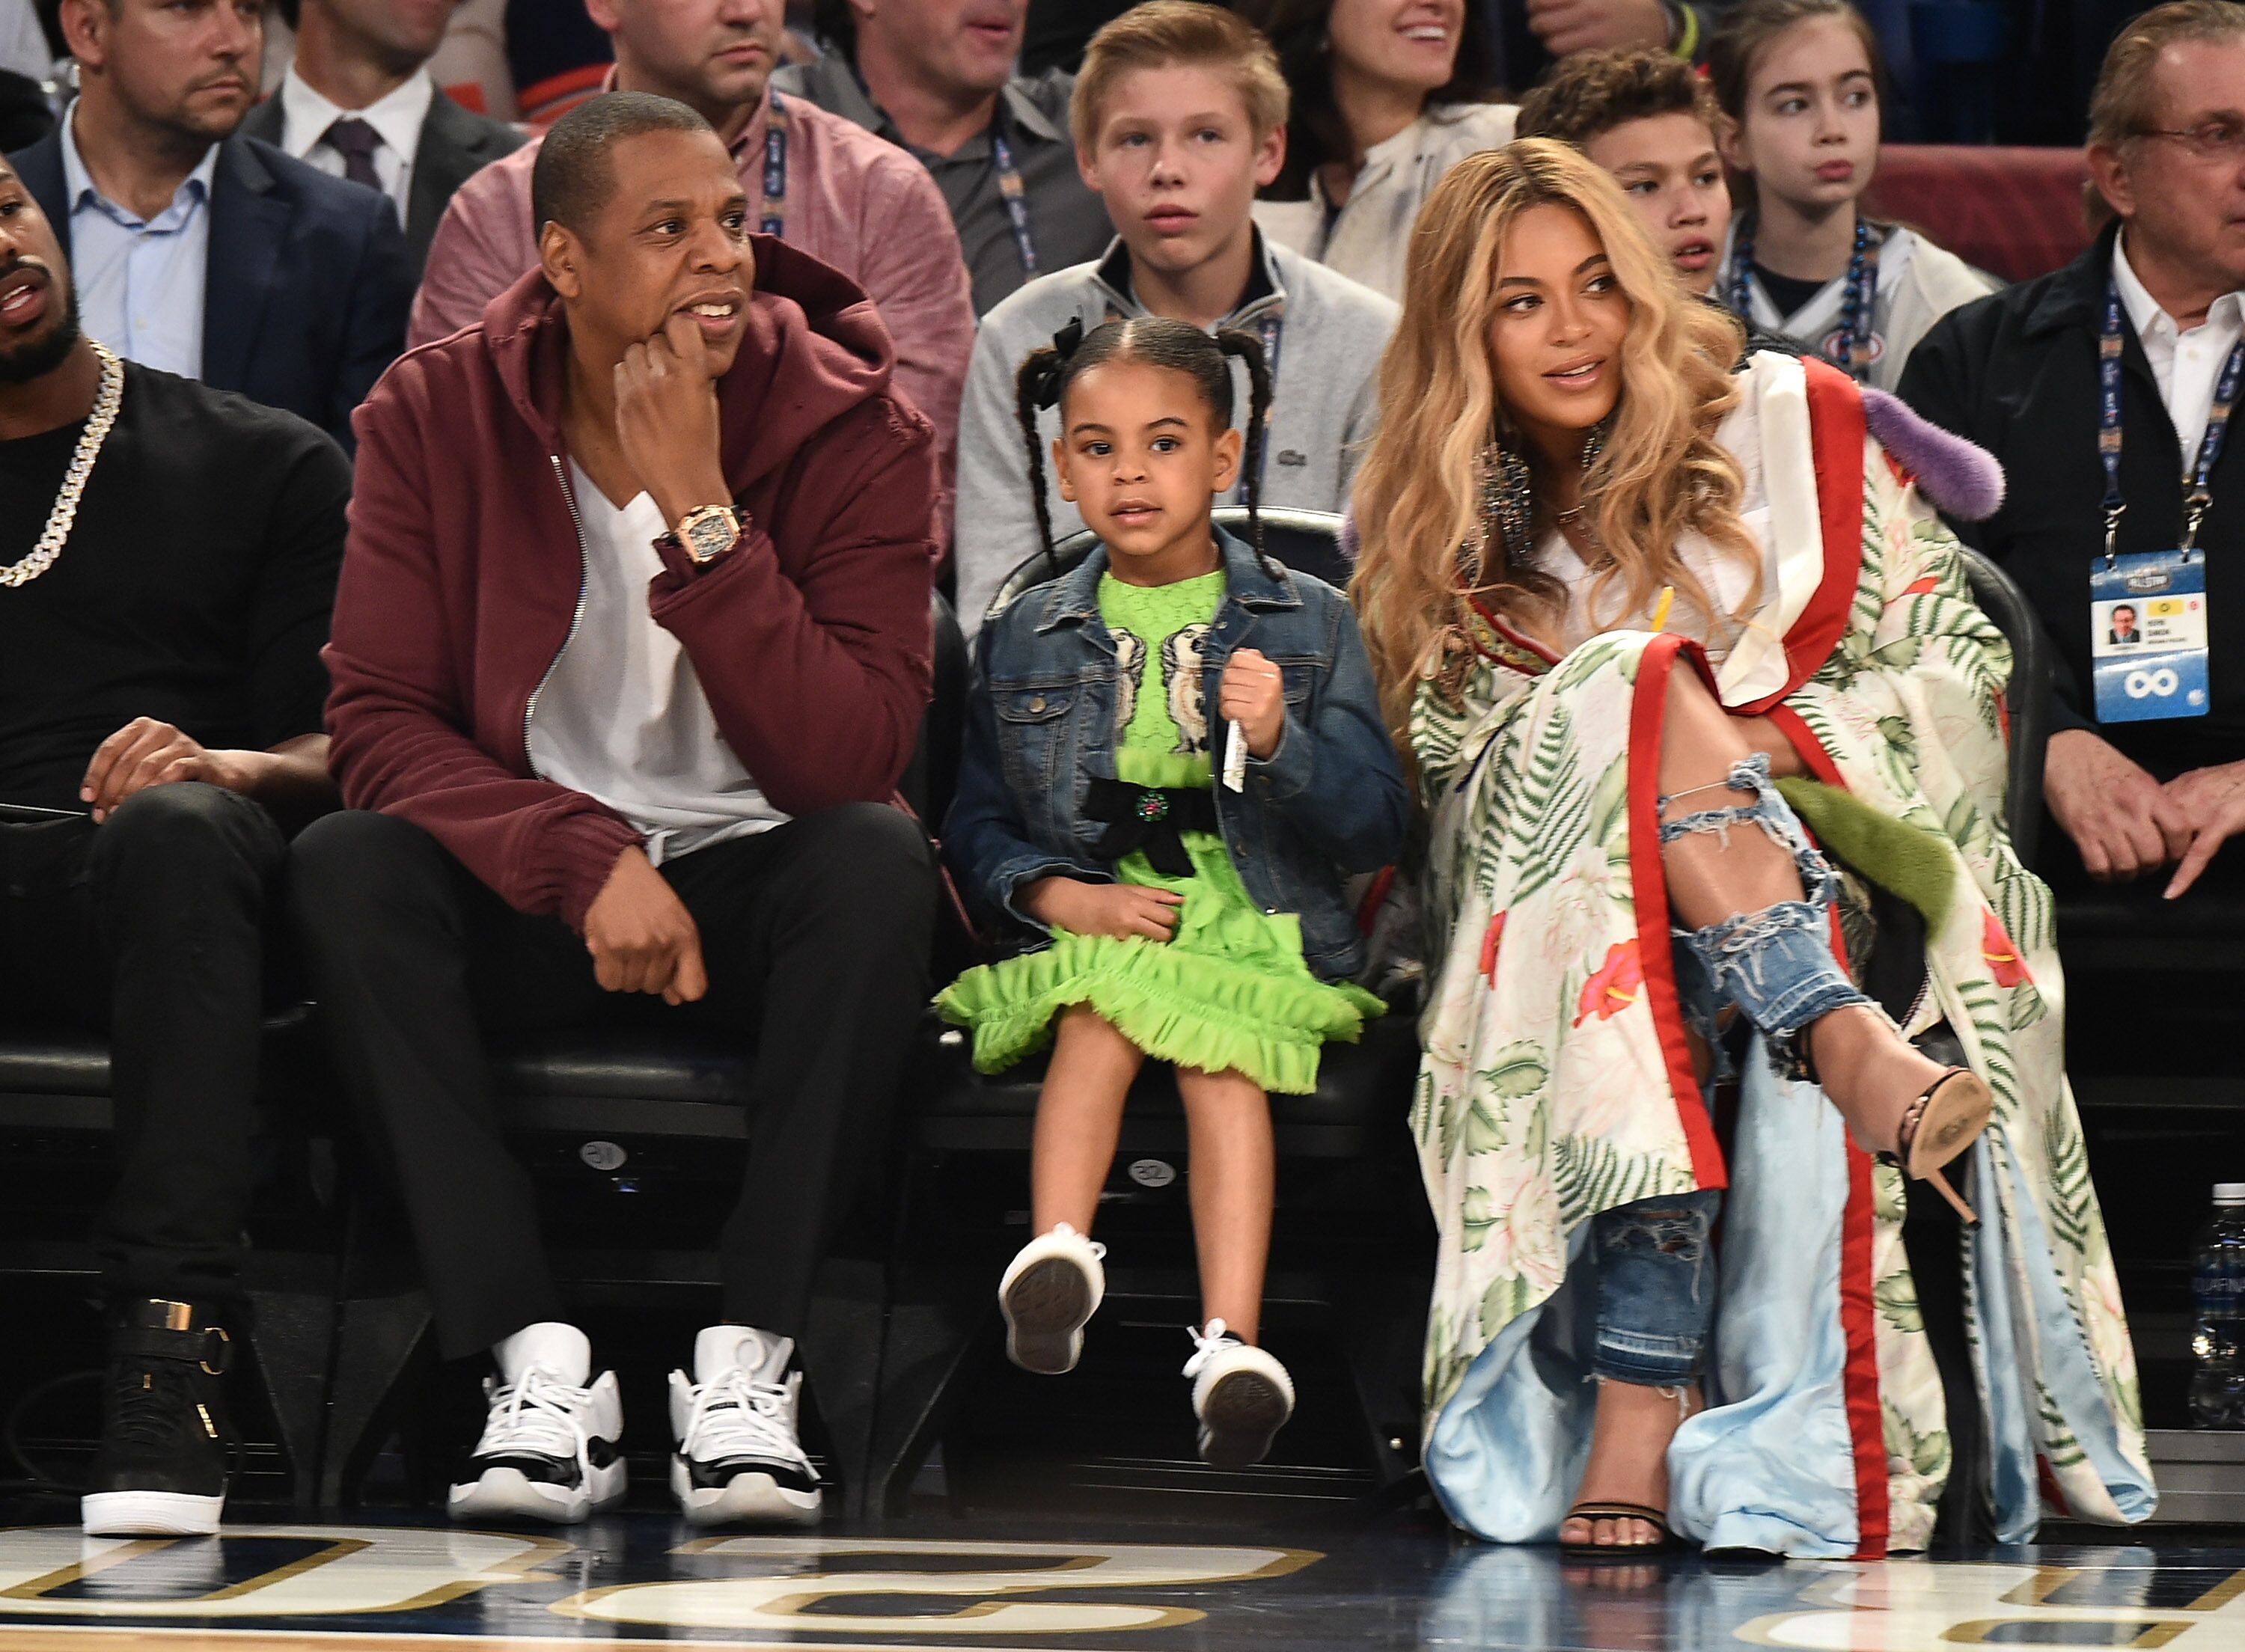 Singer Beyonce, rapper Jay-Z, and daughter Blue Ivy Carter at an NBA All Star game/ Source: Getty Images